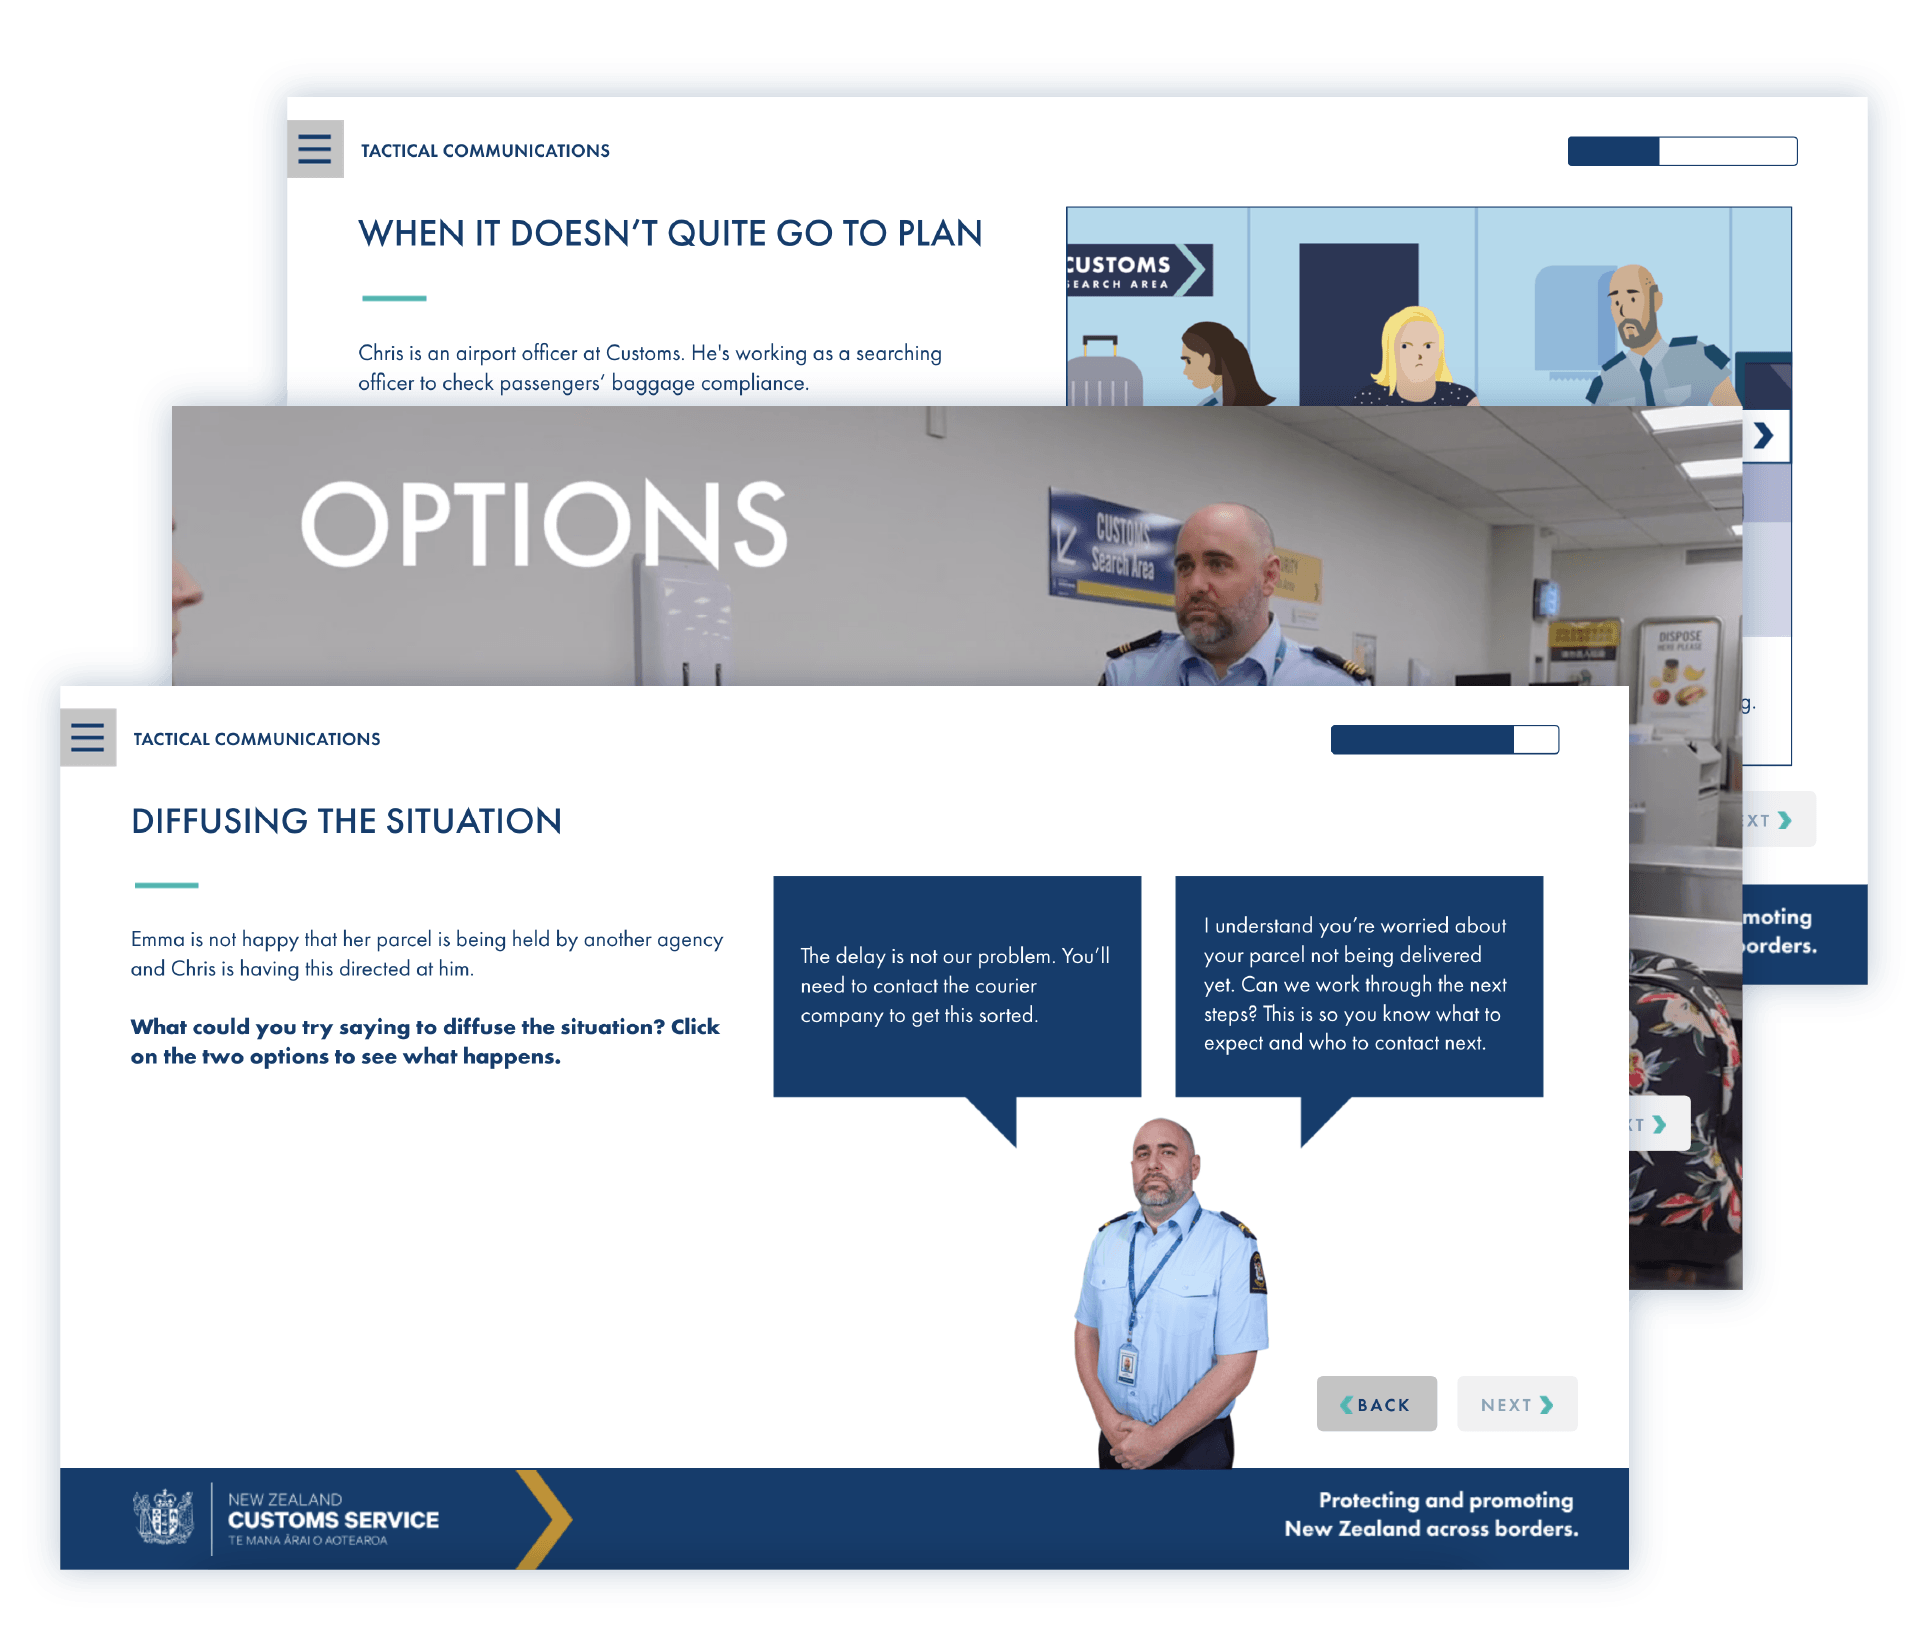 Screenshots of eLearning module pages showing scenarios with choose-your-own adventure style conversations